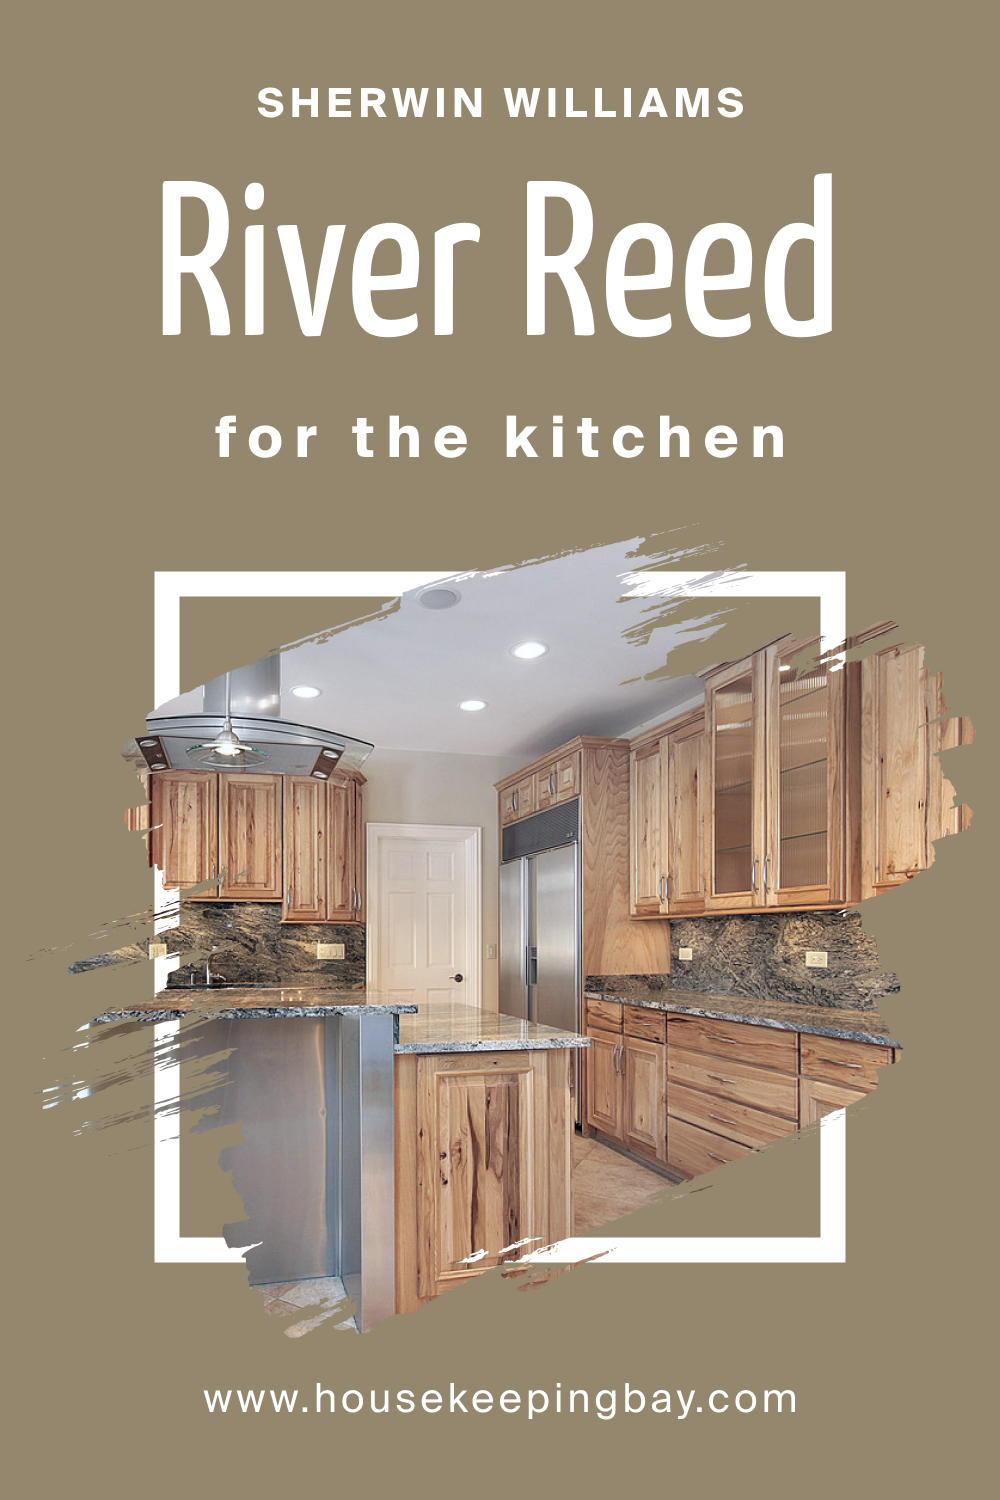 Sherwin Williams. SW 9534 River Reed For the Kitchens